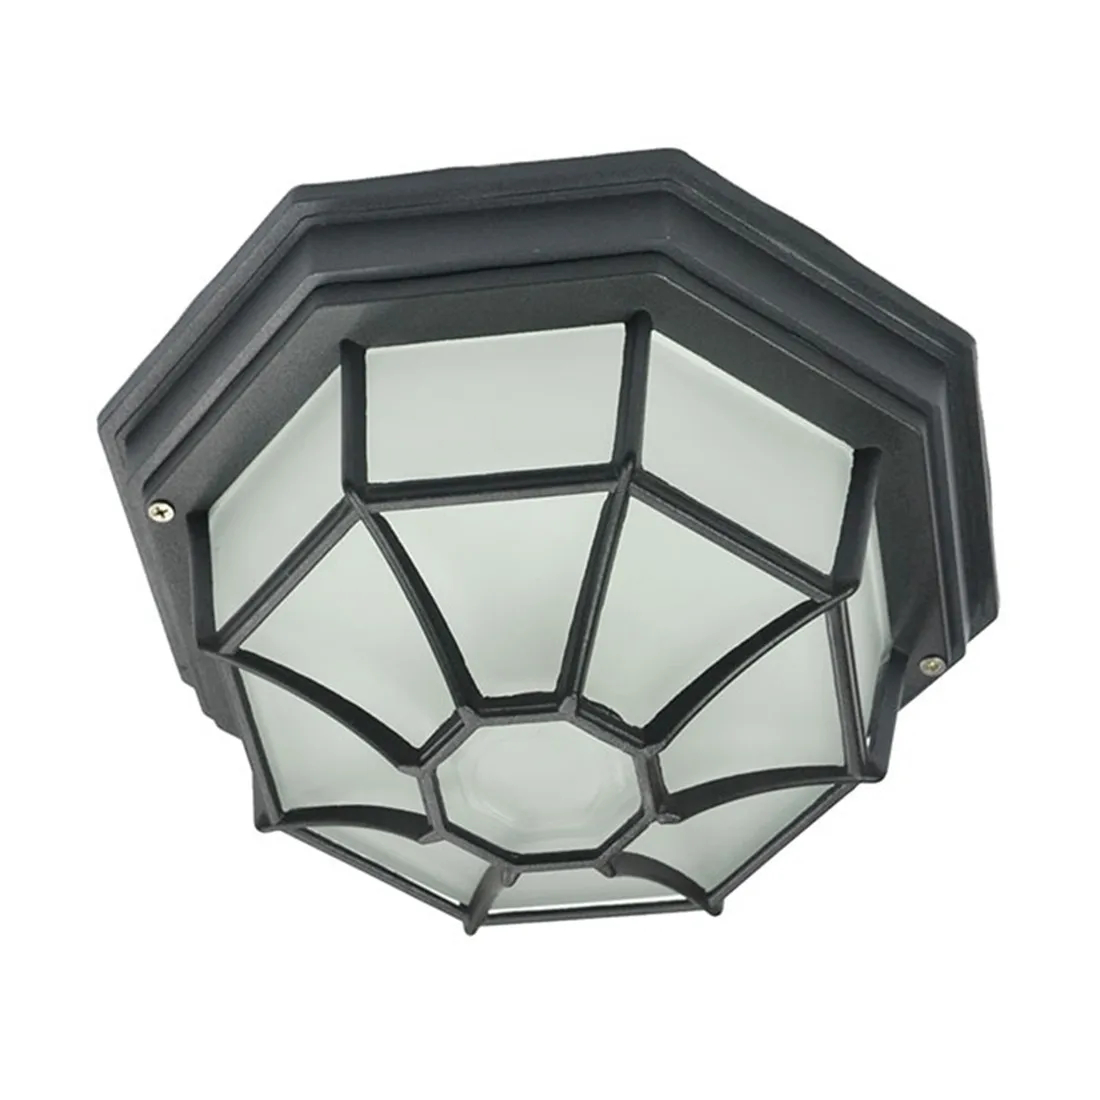 Antique Black Bronze Outdoor Ceiling Light E27 Flush Mount Lamp for Outdoor Pathway Walkway Balcony Lighting 220v 12 inch dimmable led flush mount ceiling lamp wide beam angle even light high light transmittance for living workspace